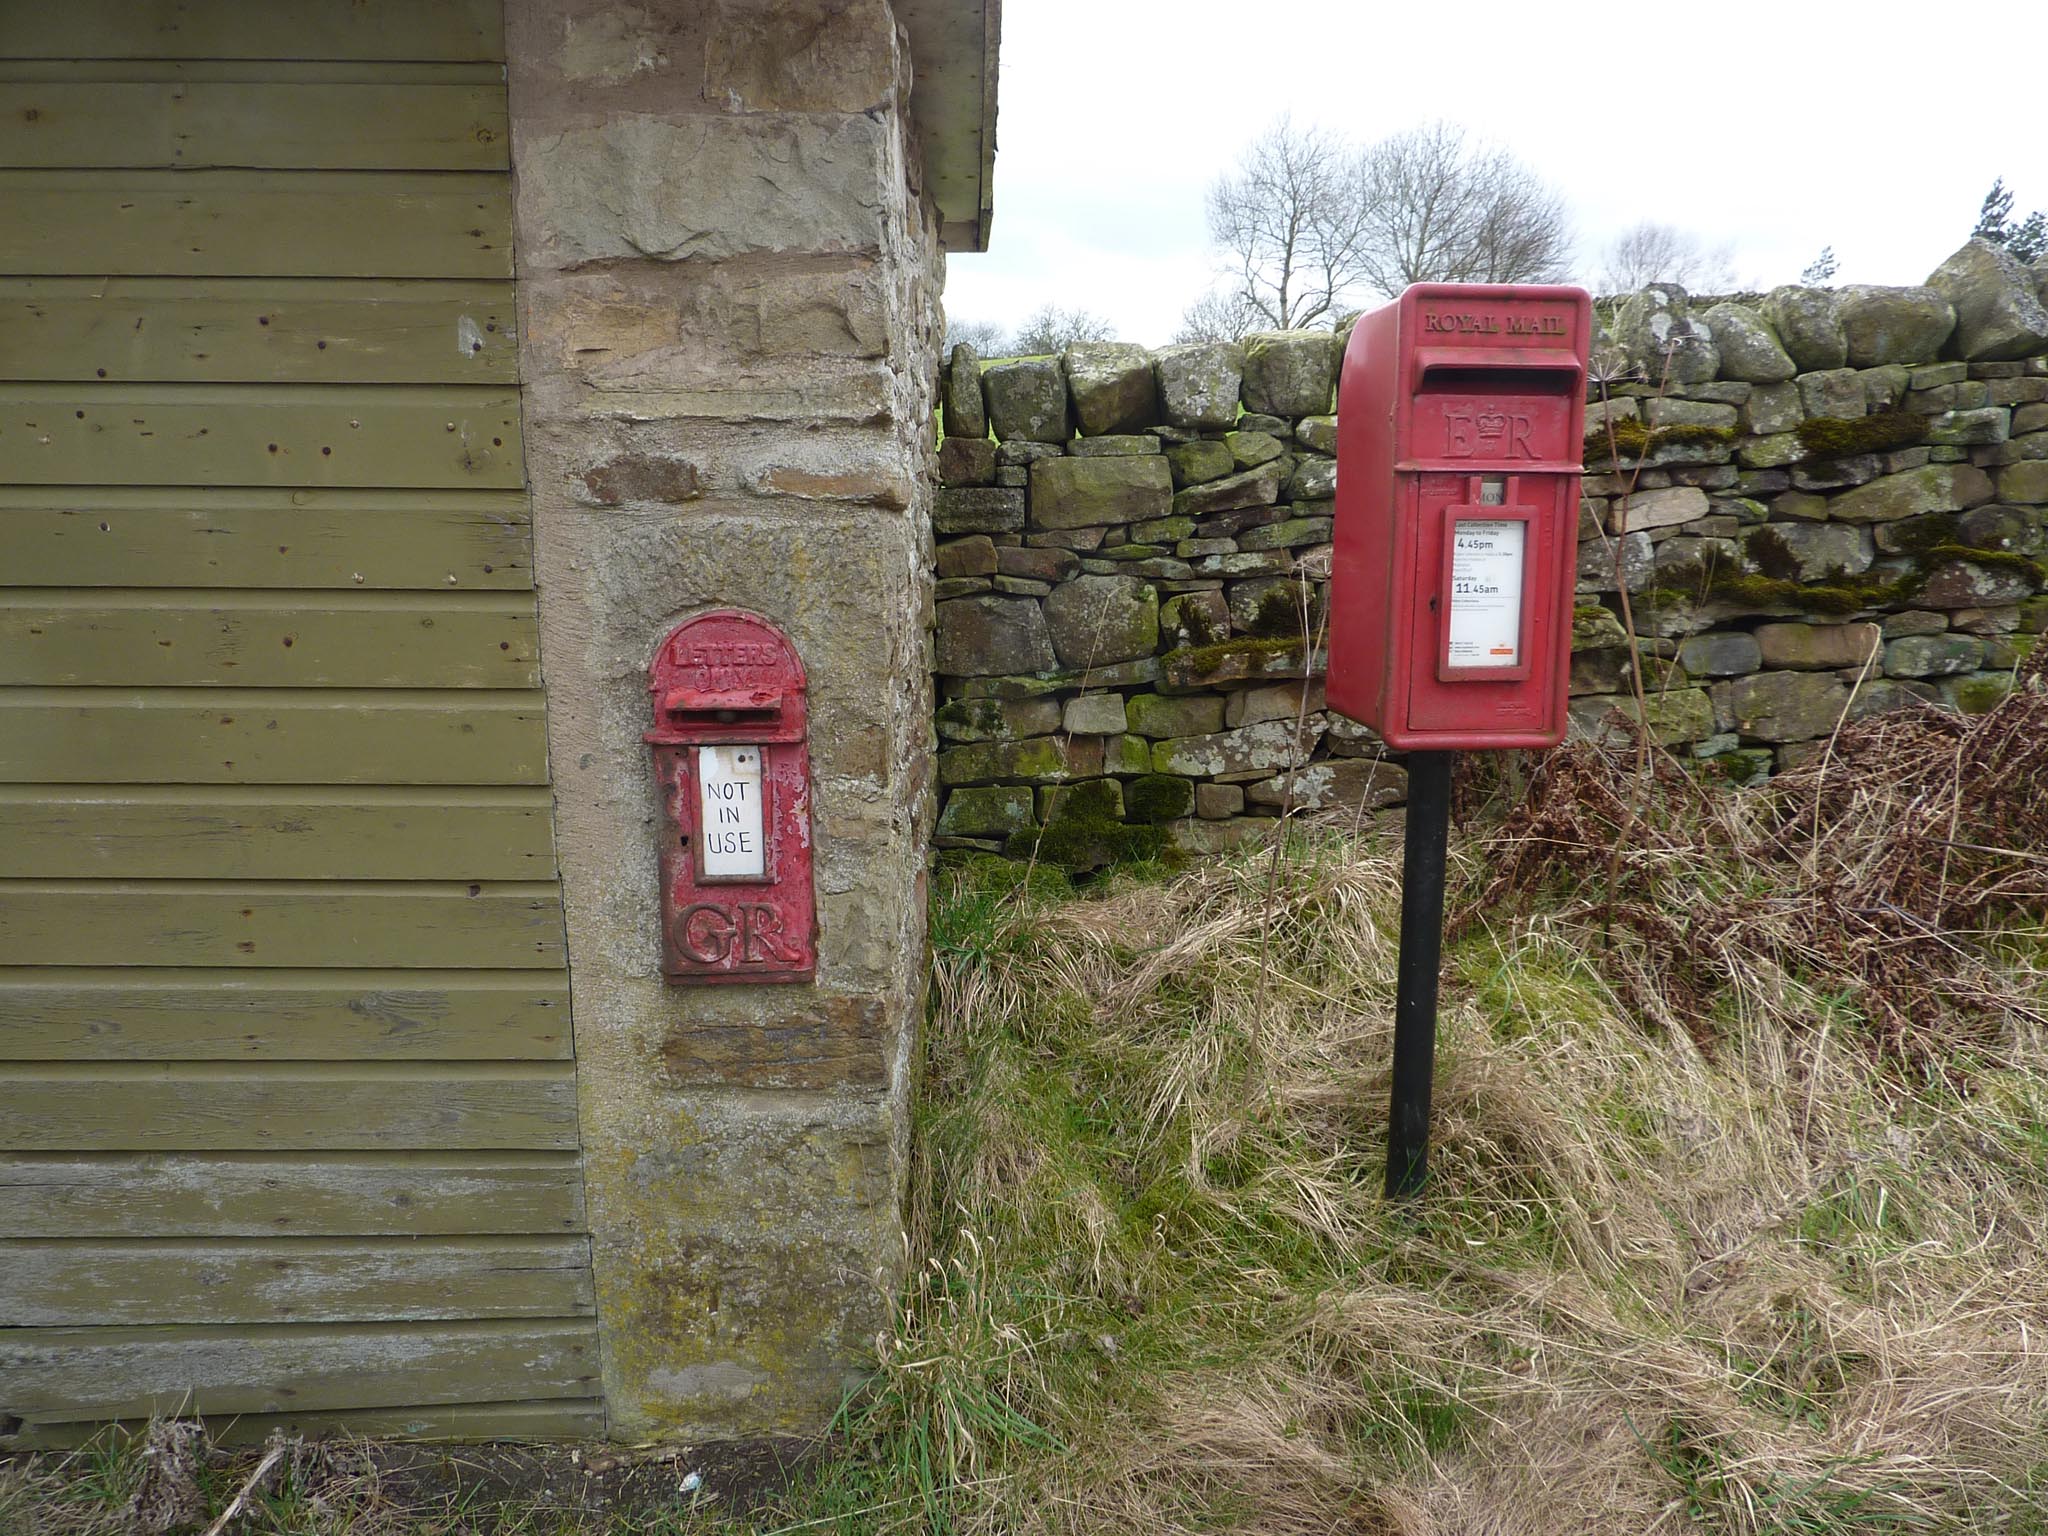 GR lamp box, 1930s, with E2R lamp box in wall, 2000s, Northern England. Andrew R Young